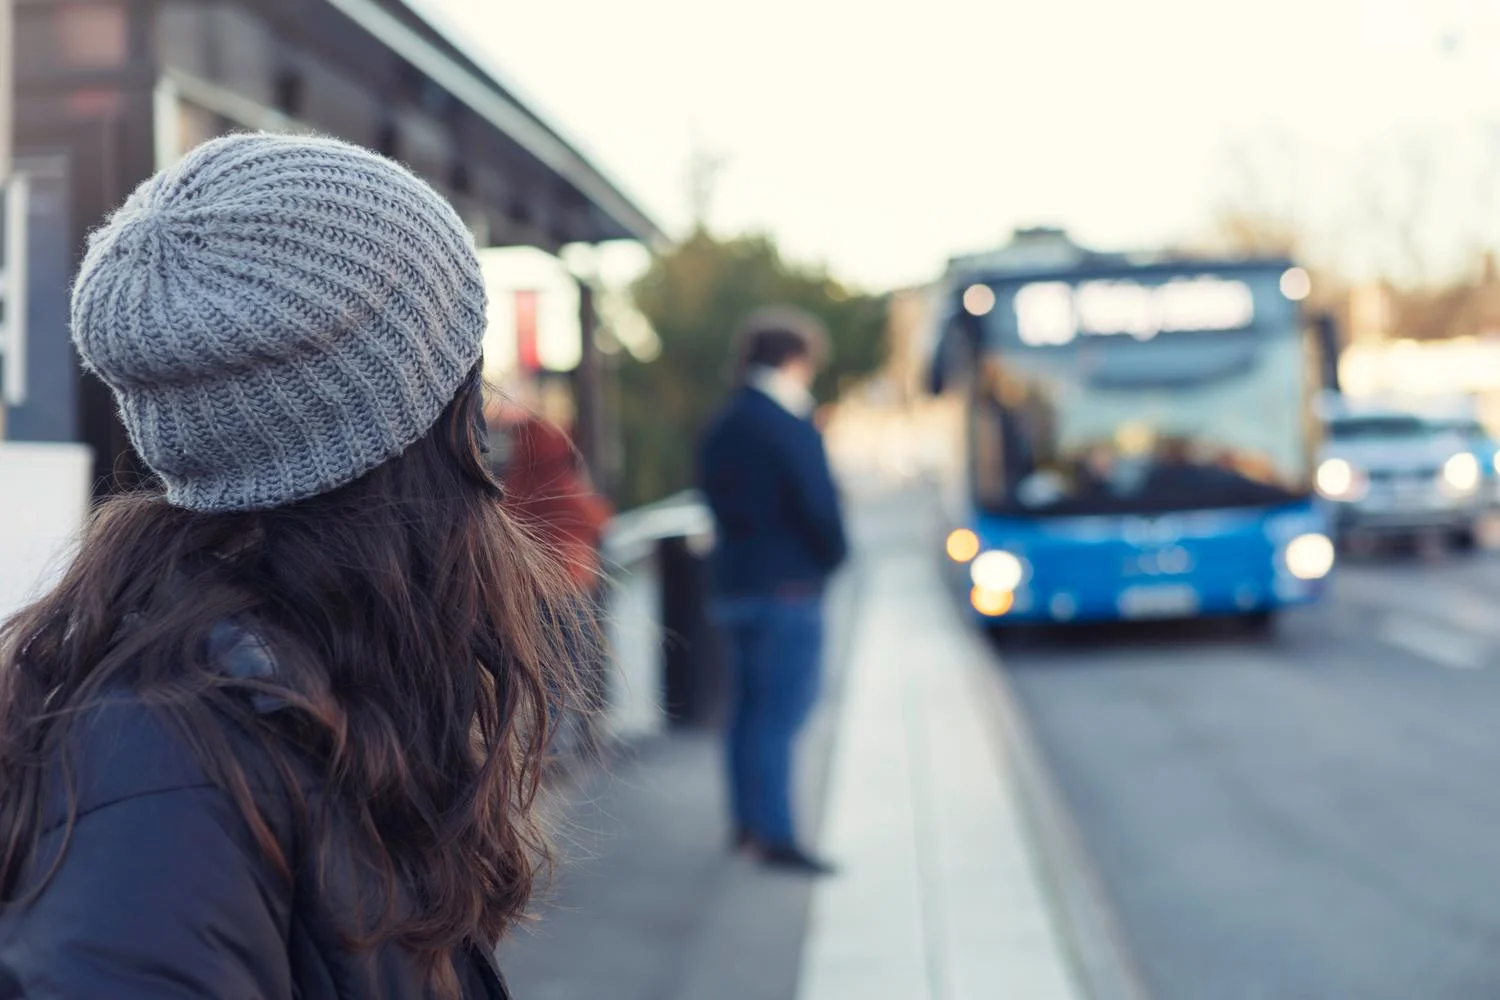 A bus arrives at a bus stop where people are waiting.